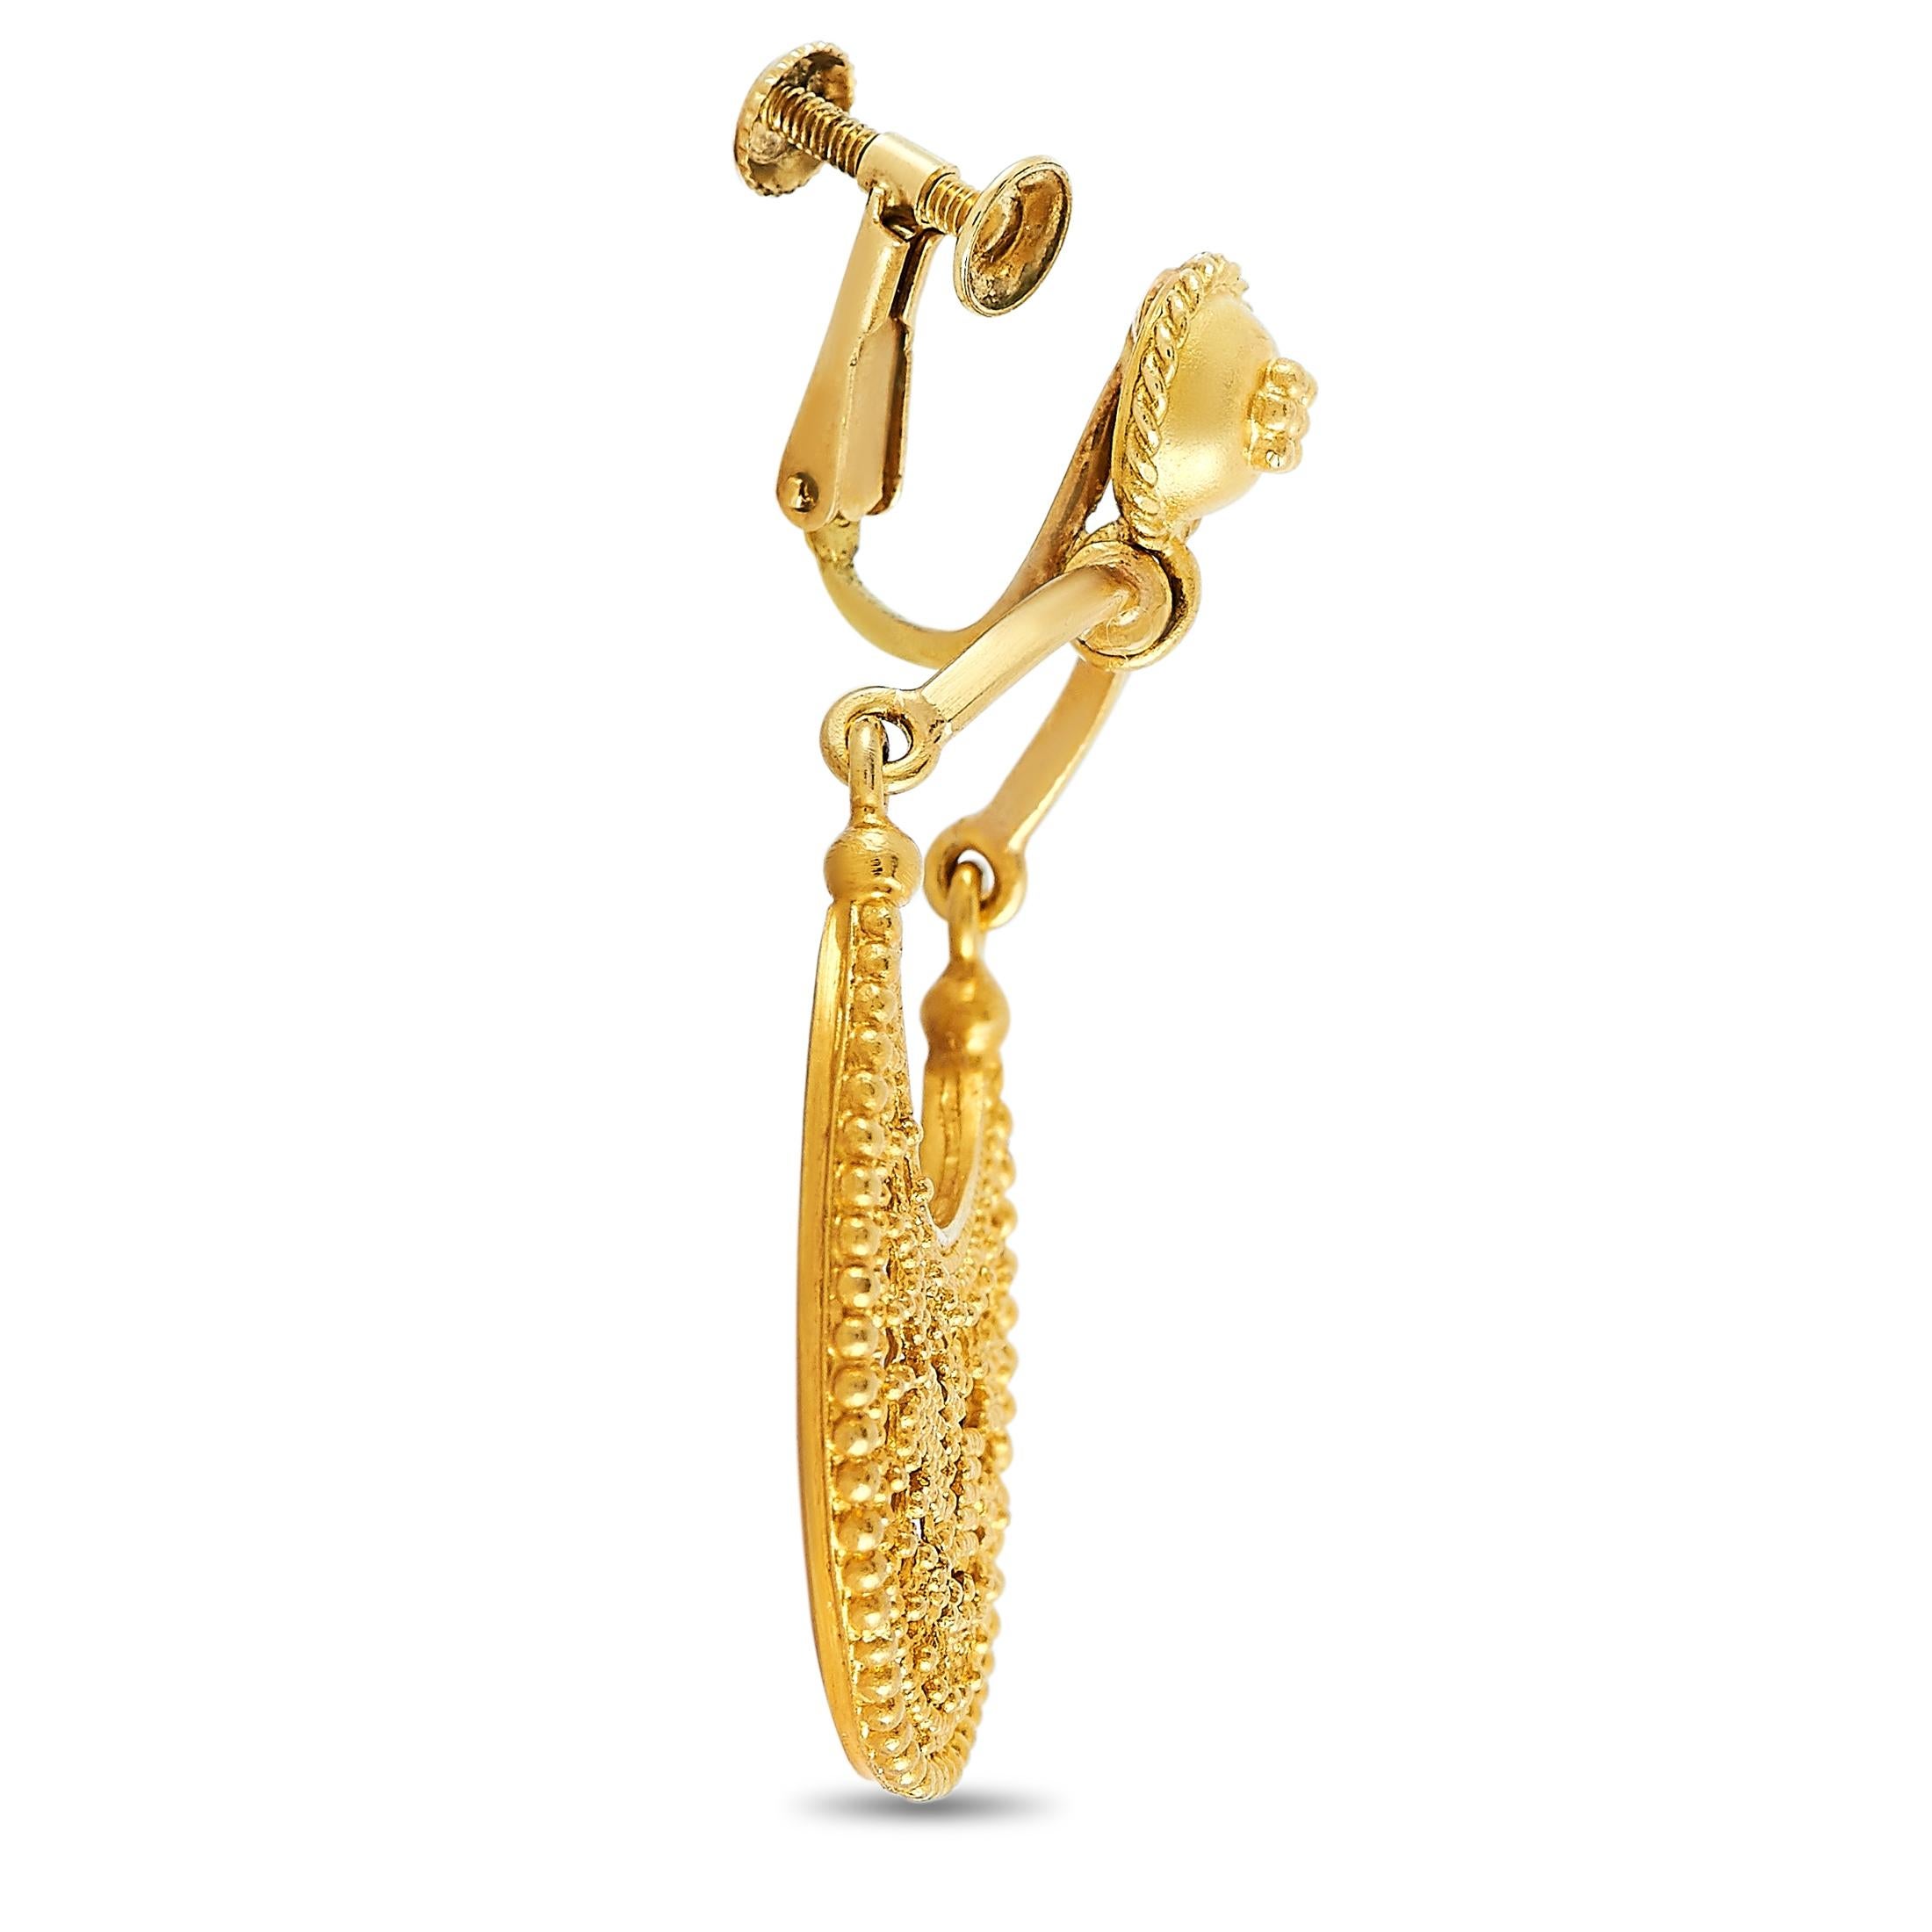 These Ilias Lalaounis earrings are made of 18K yellow gold and each of the two weighs 6.7 grams. They measure 1.62” in length and 1” in width.
 
 The pair is offered in estate condition and includes a gift box.